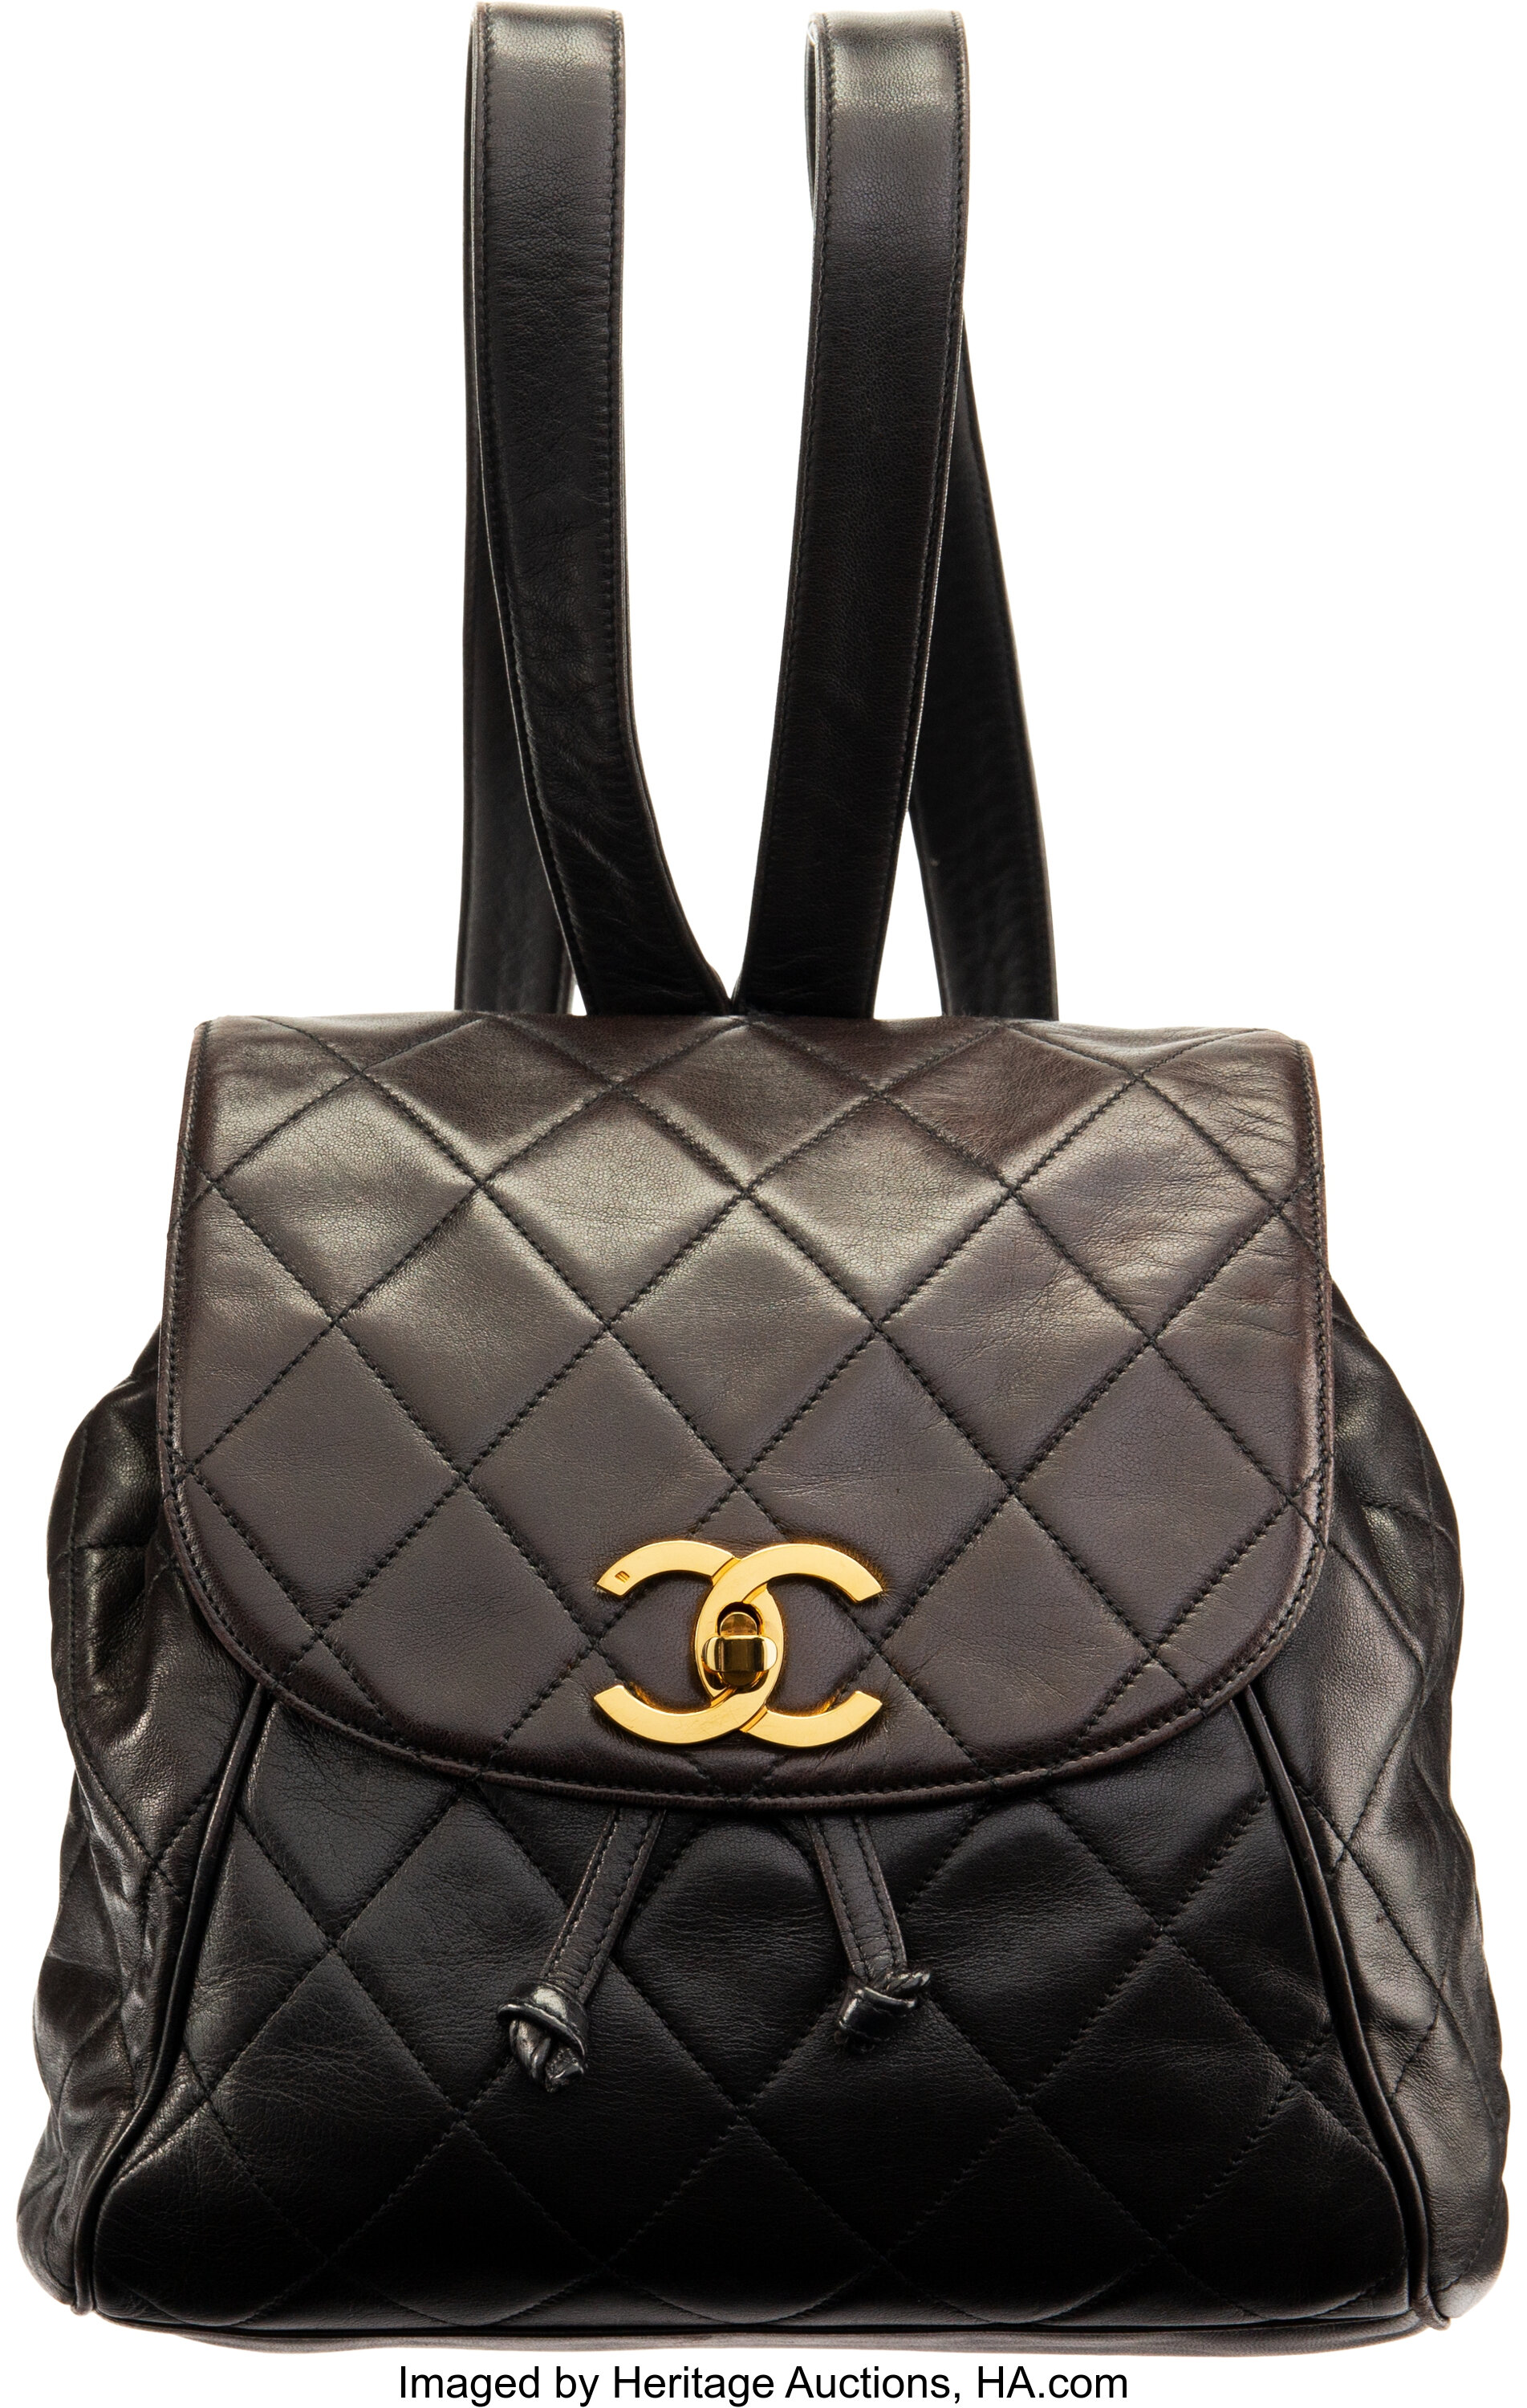 Chanel Vintage Black Quilted Calfskin Leather Backpack with Gold